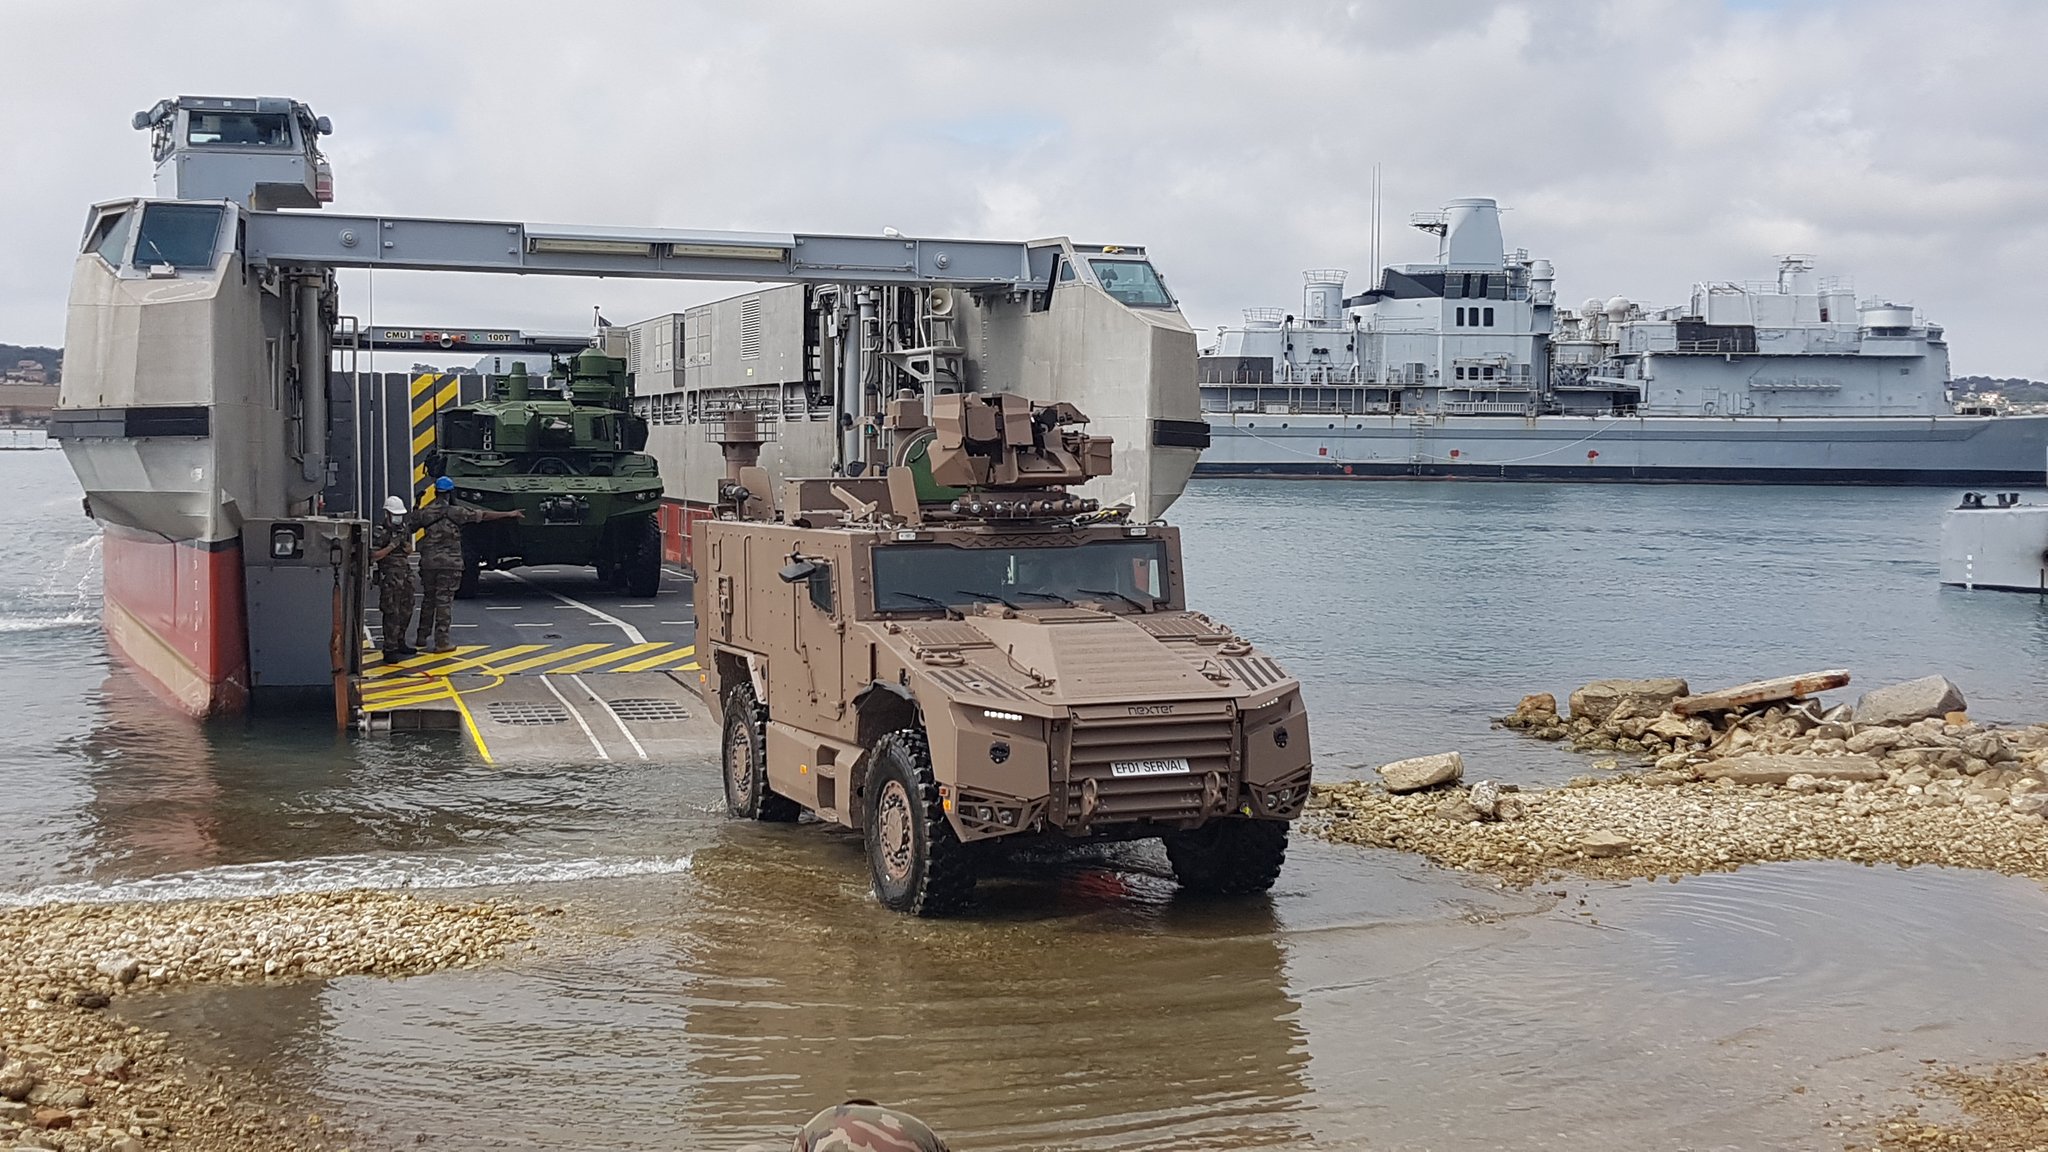 French Directorate General of Armaments Qualifies Serval Armored Vehiclefor Amphibious Operation